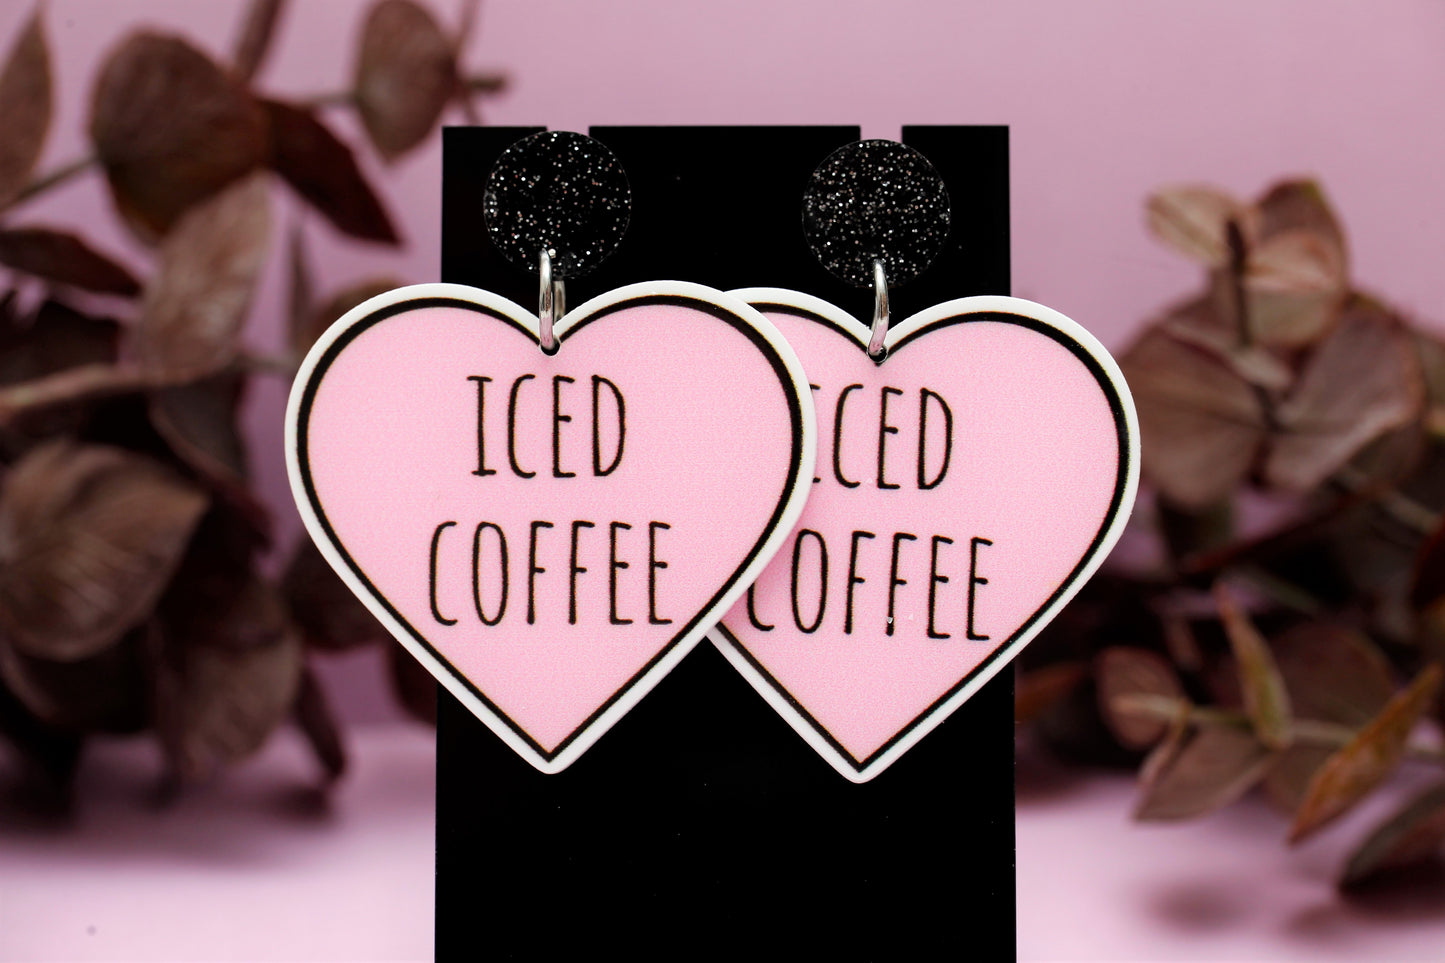 Iced Coffee Statement Dangles